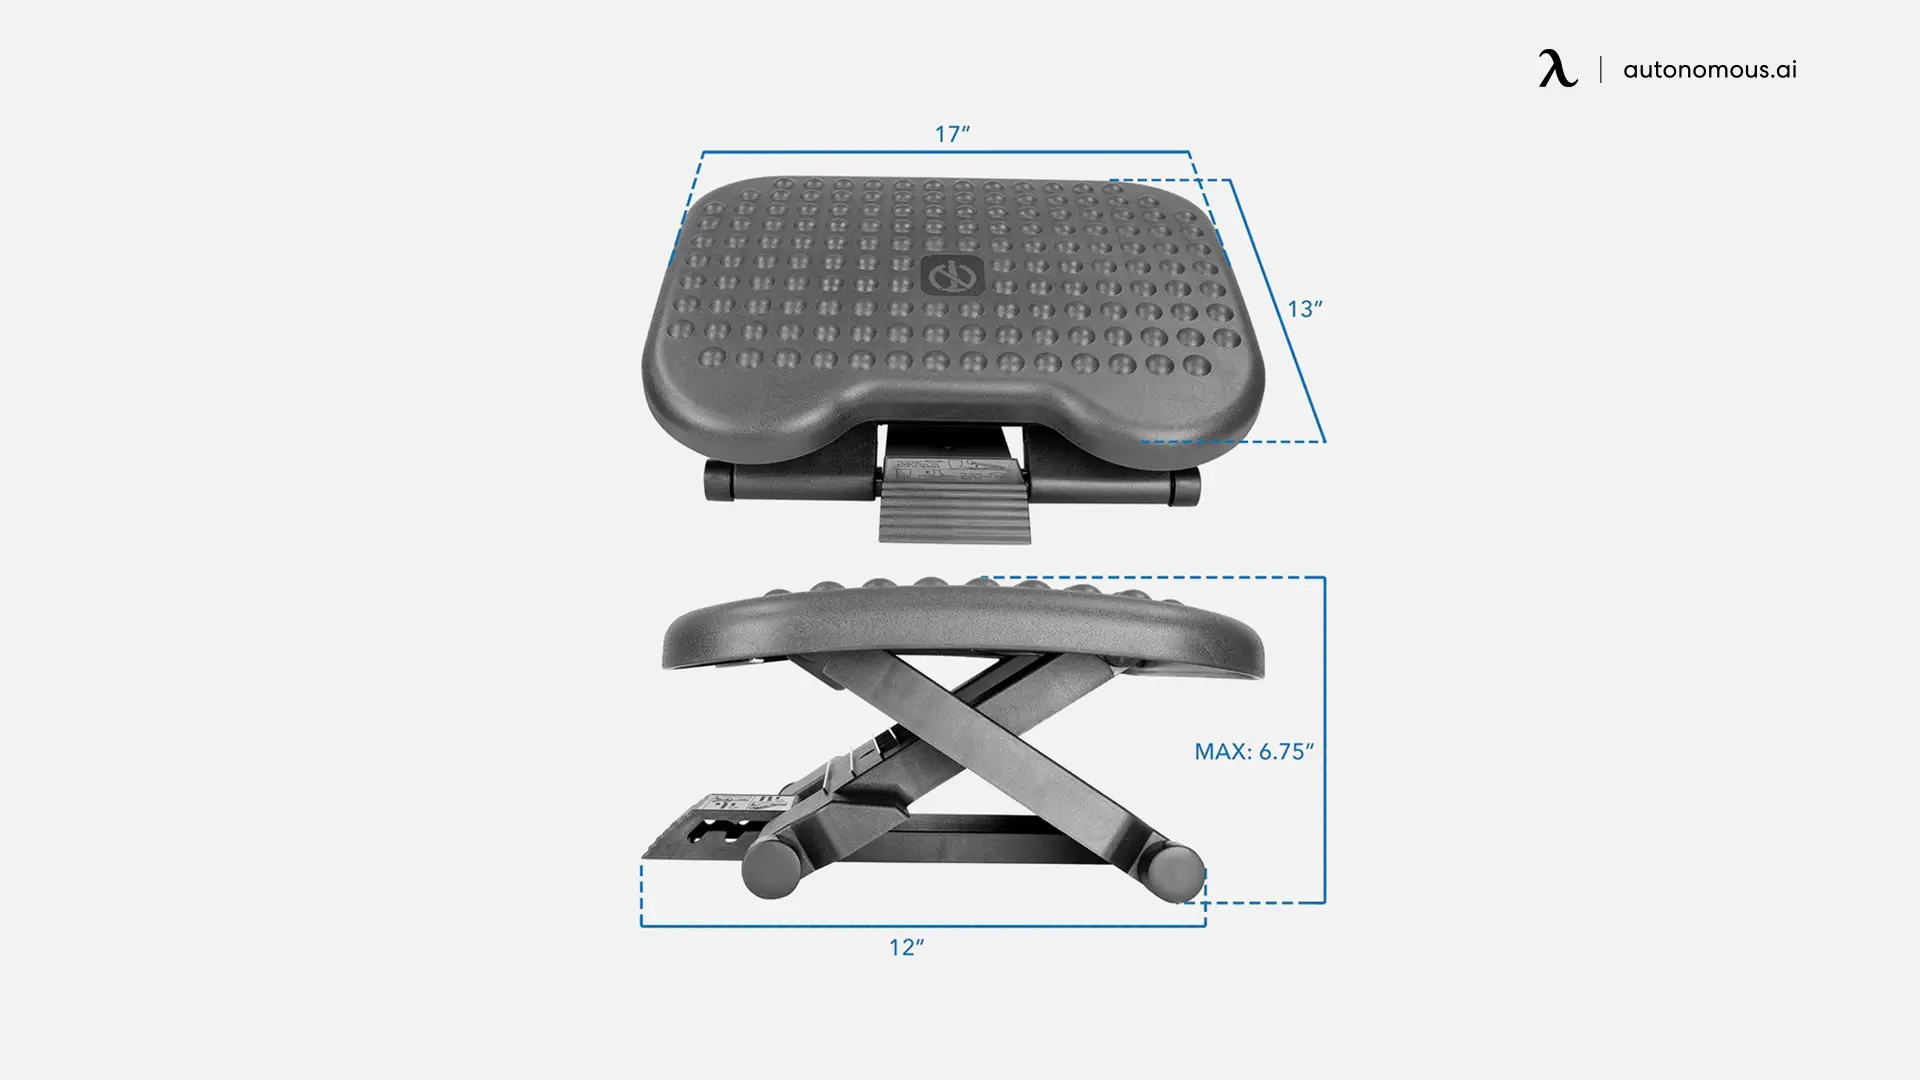 https://cdn.autonomous.ai/static/upload/images/common/upload/20220726/How-To-Choose-a-Good-Footrest-for-Chairs-at-Work-7-Choices_3af275c7bf8.webp